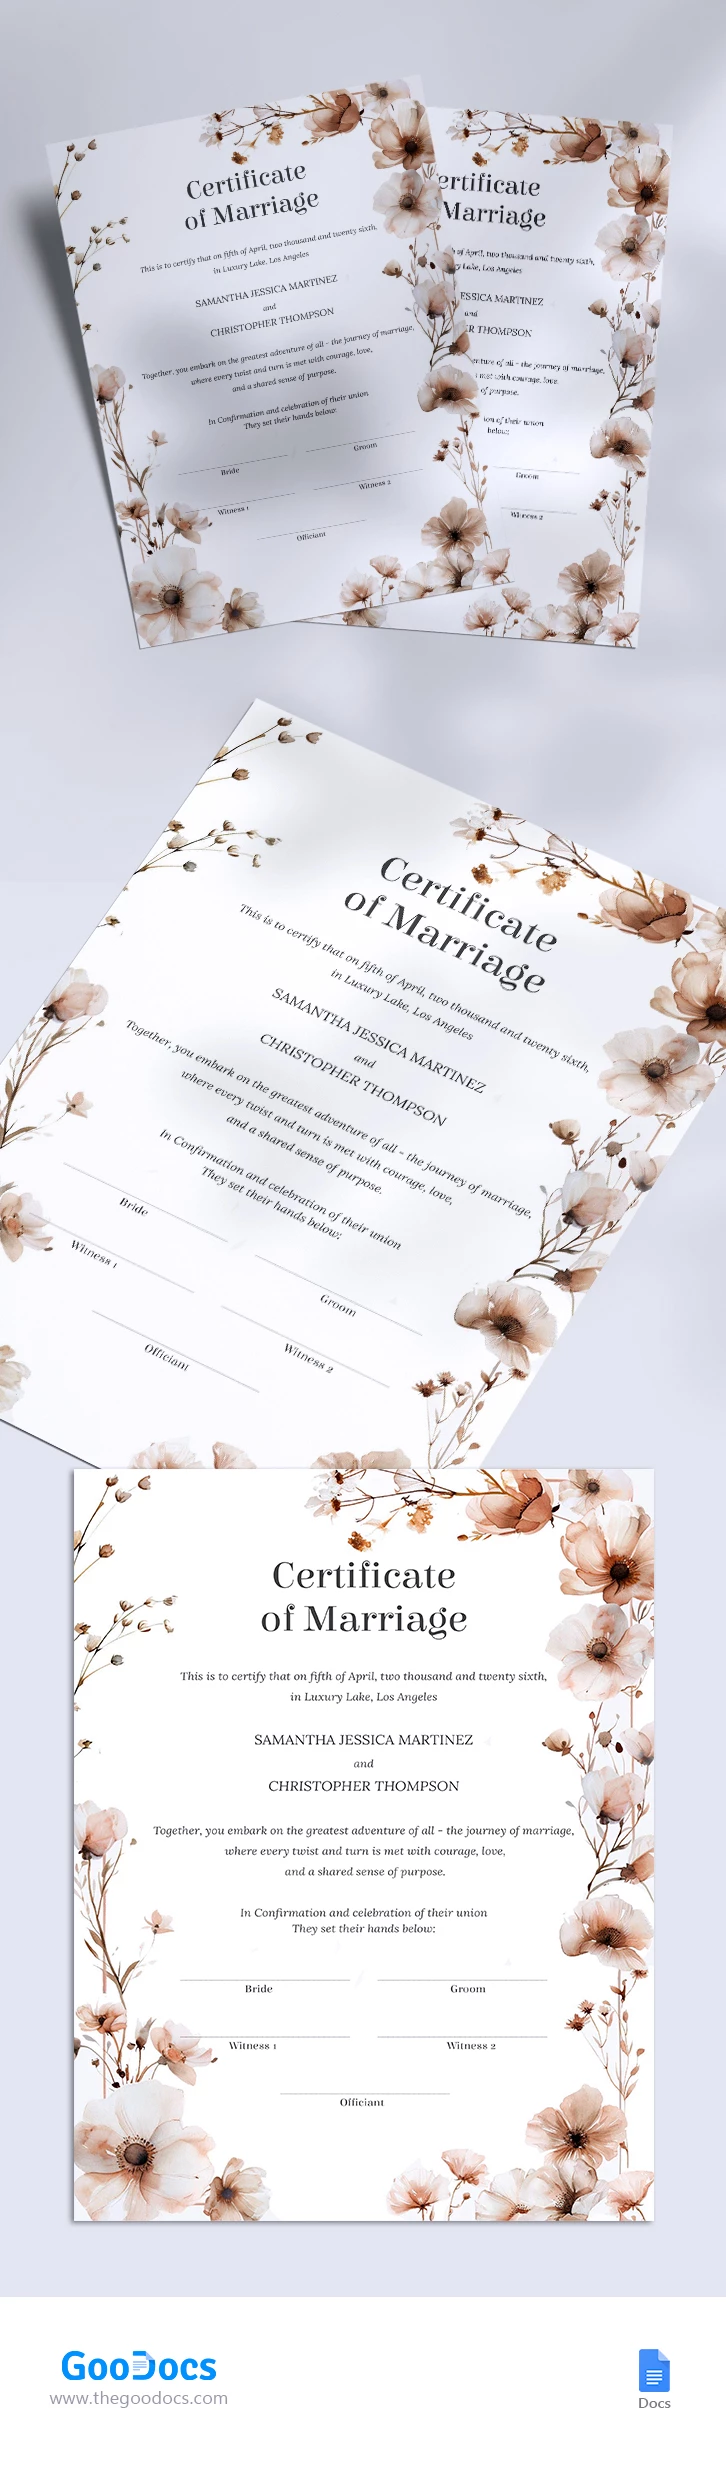 Marriage Certificate - free Google Docs Template - 10068336